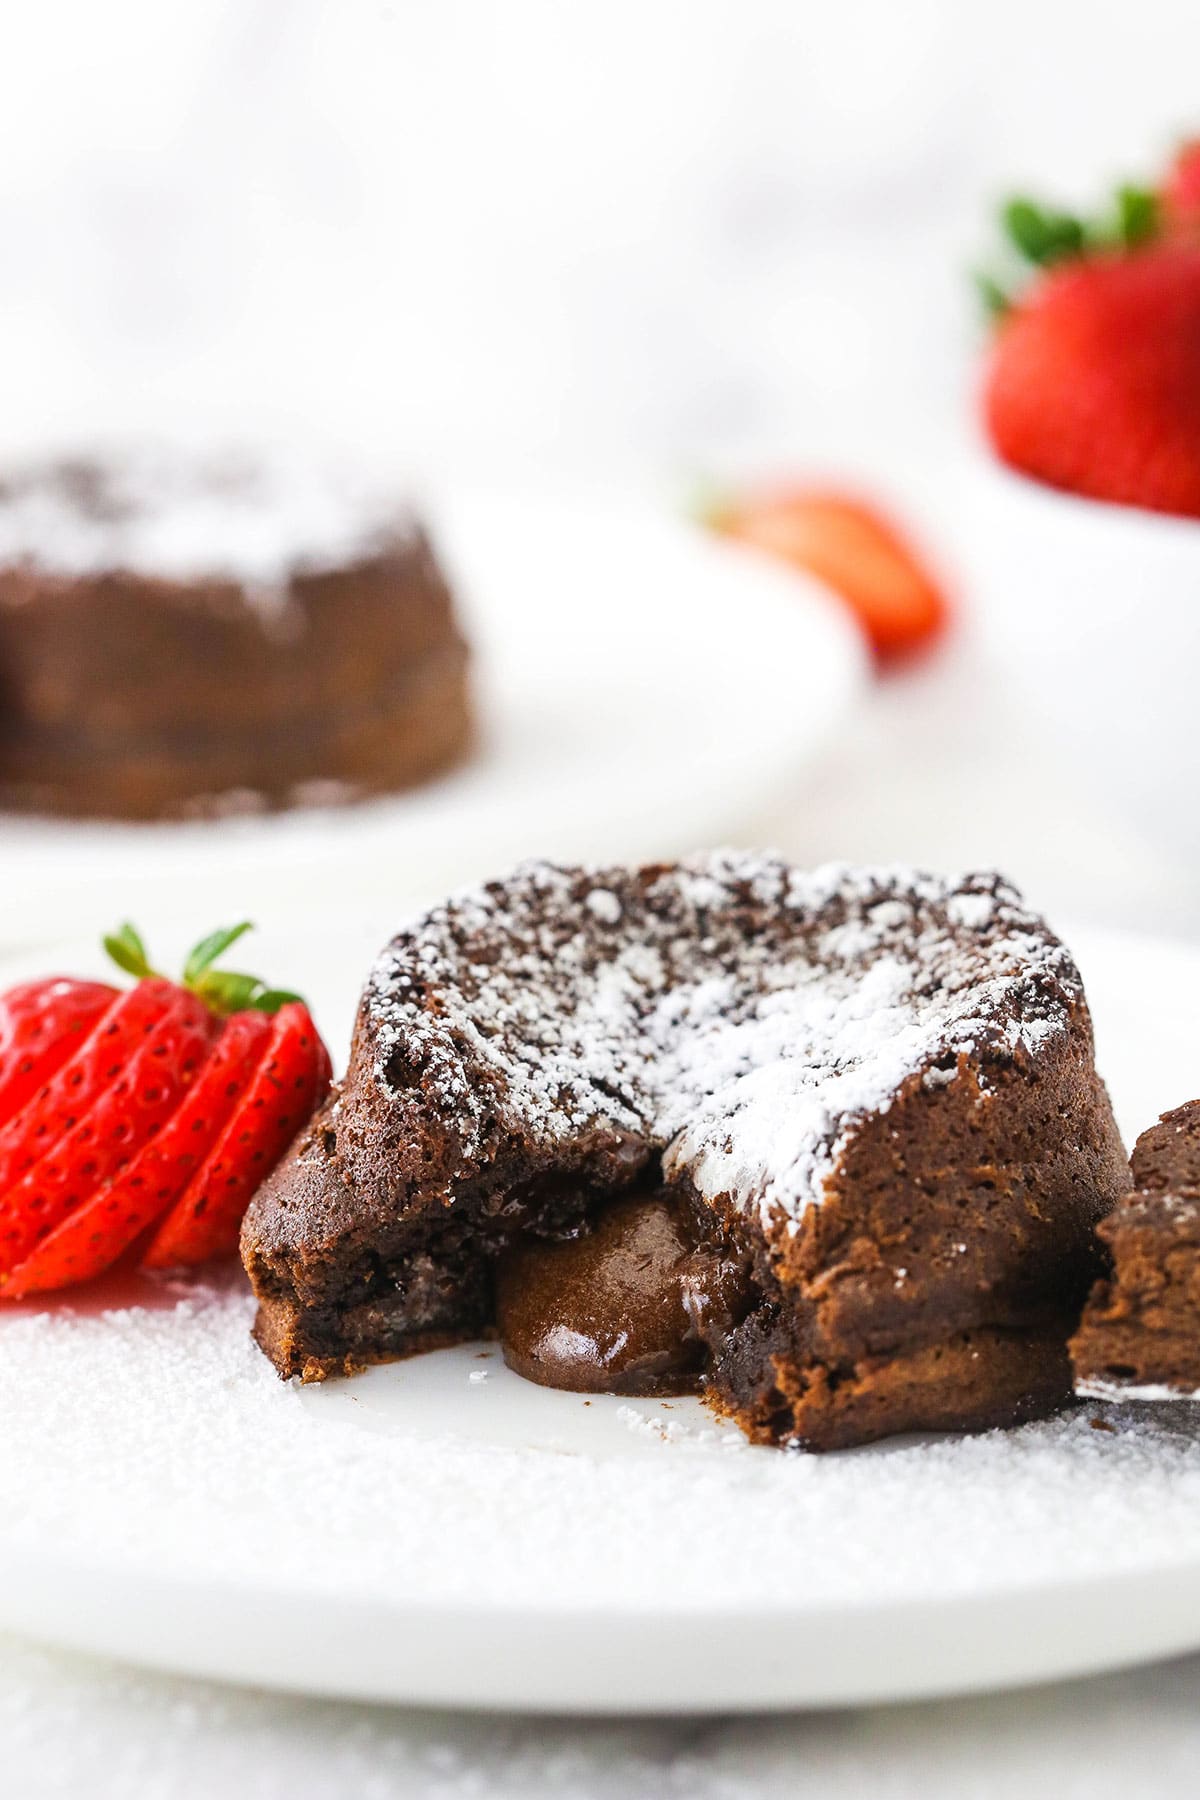 Gluten-Free Chocolate Truffle Lava Cakes delivered